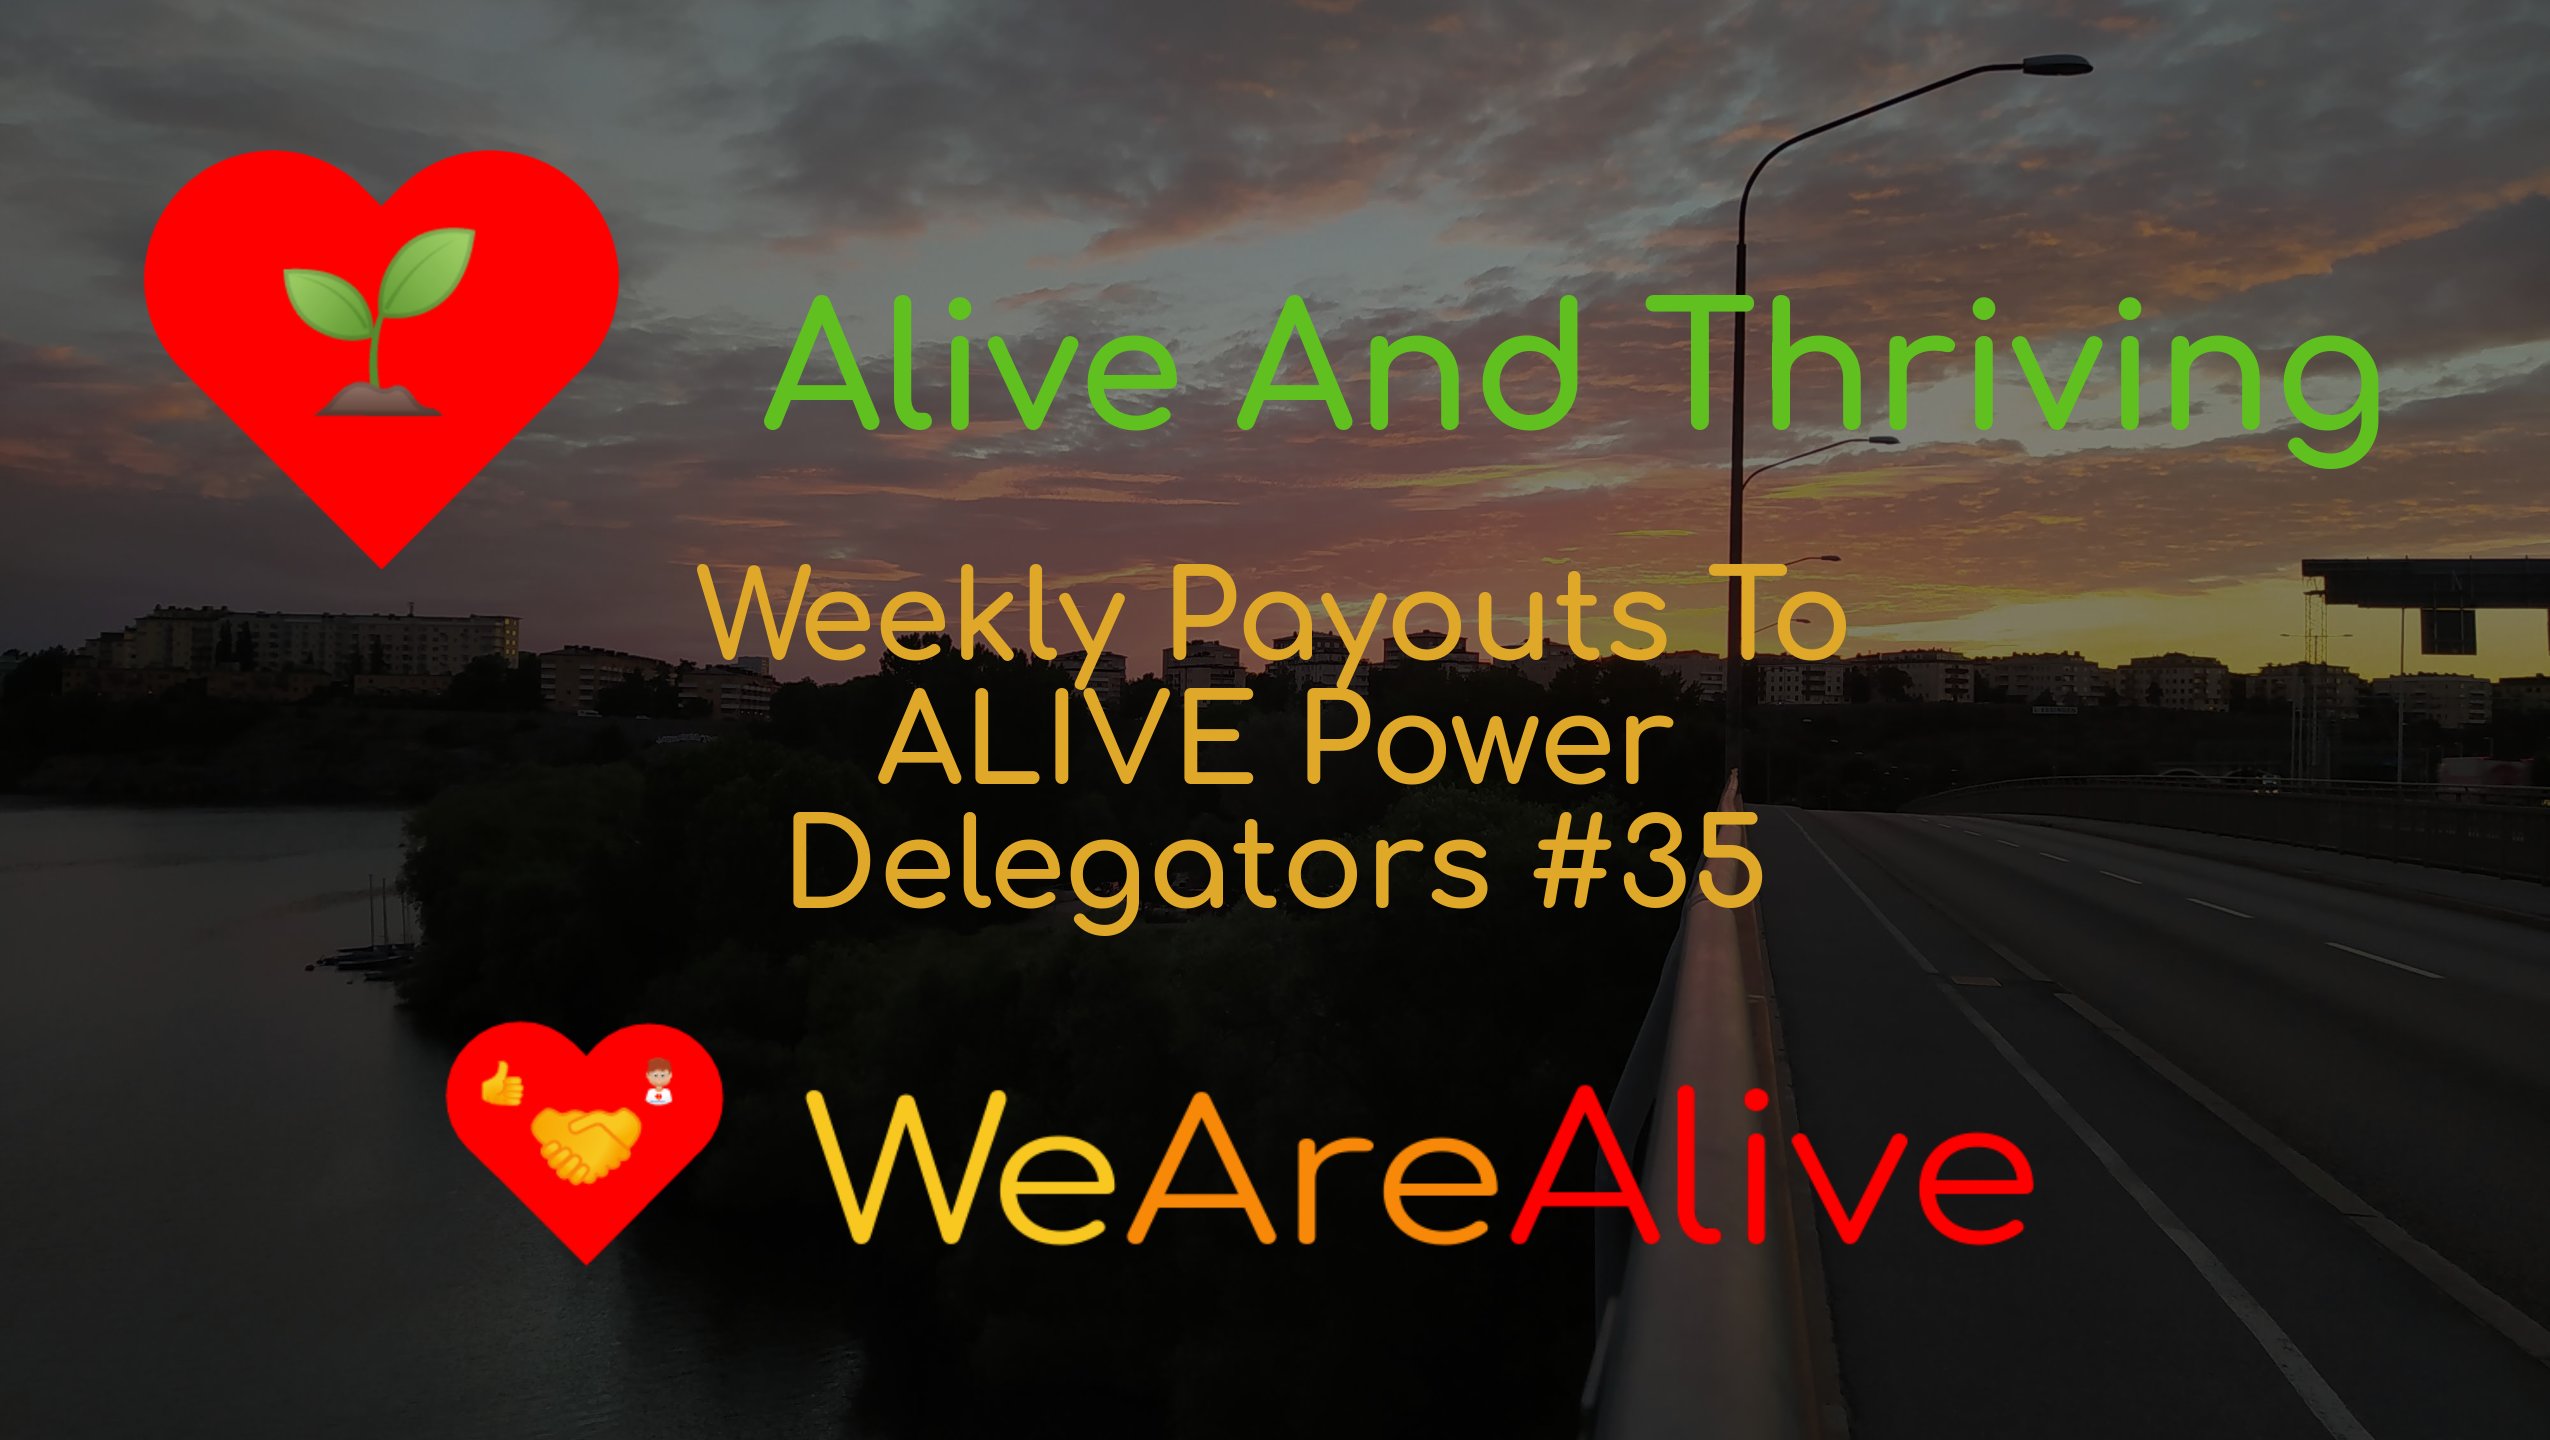 @wearealive/alive-and-thriving-weekly-payouts-to-alive-power-delegators-35